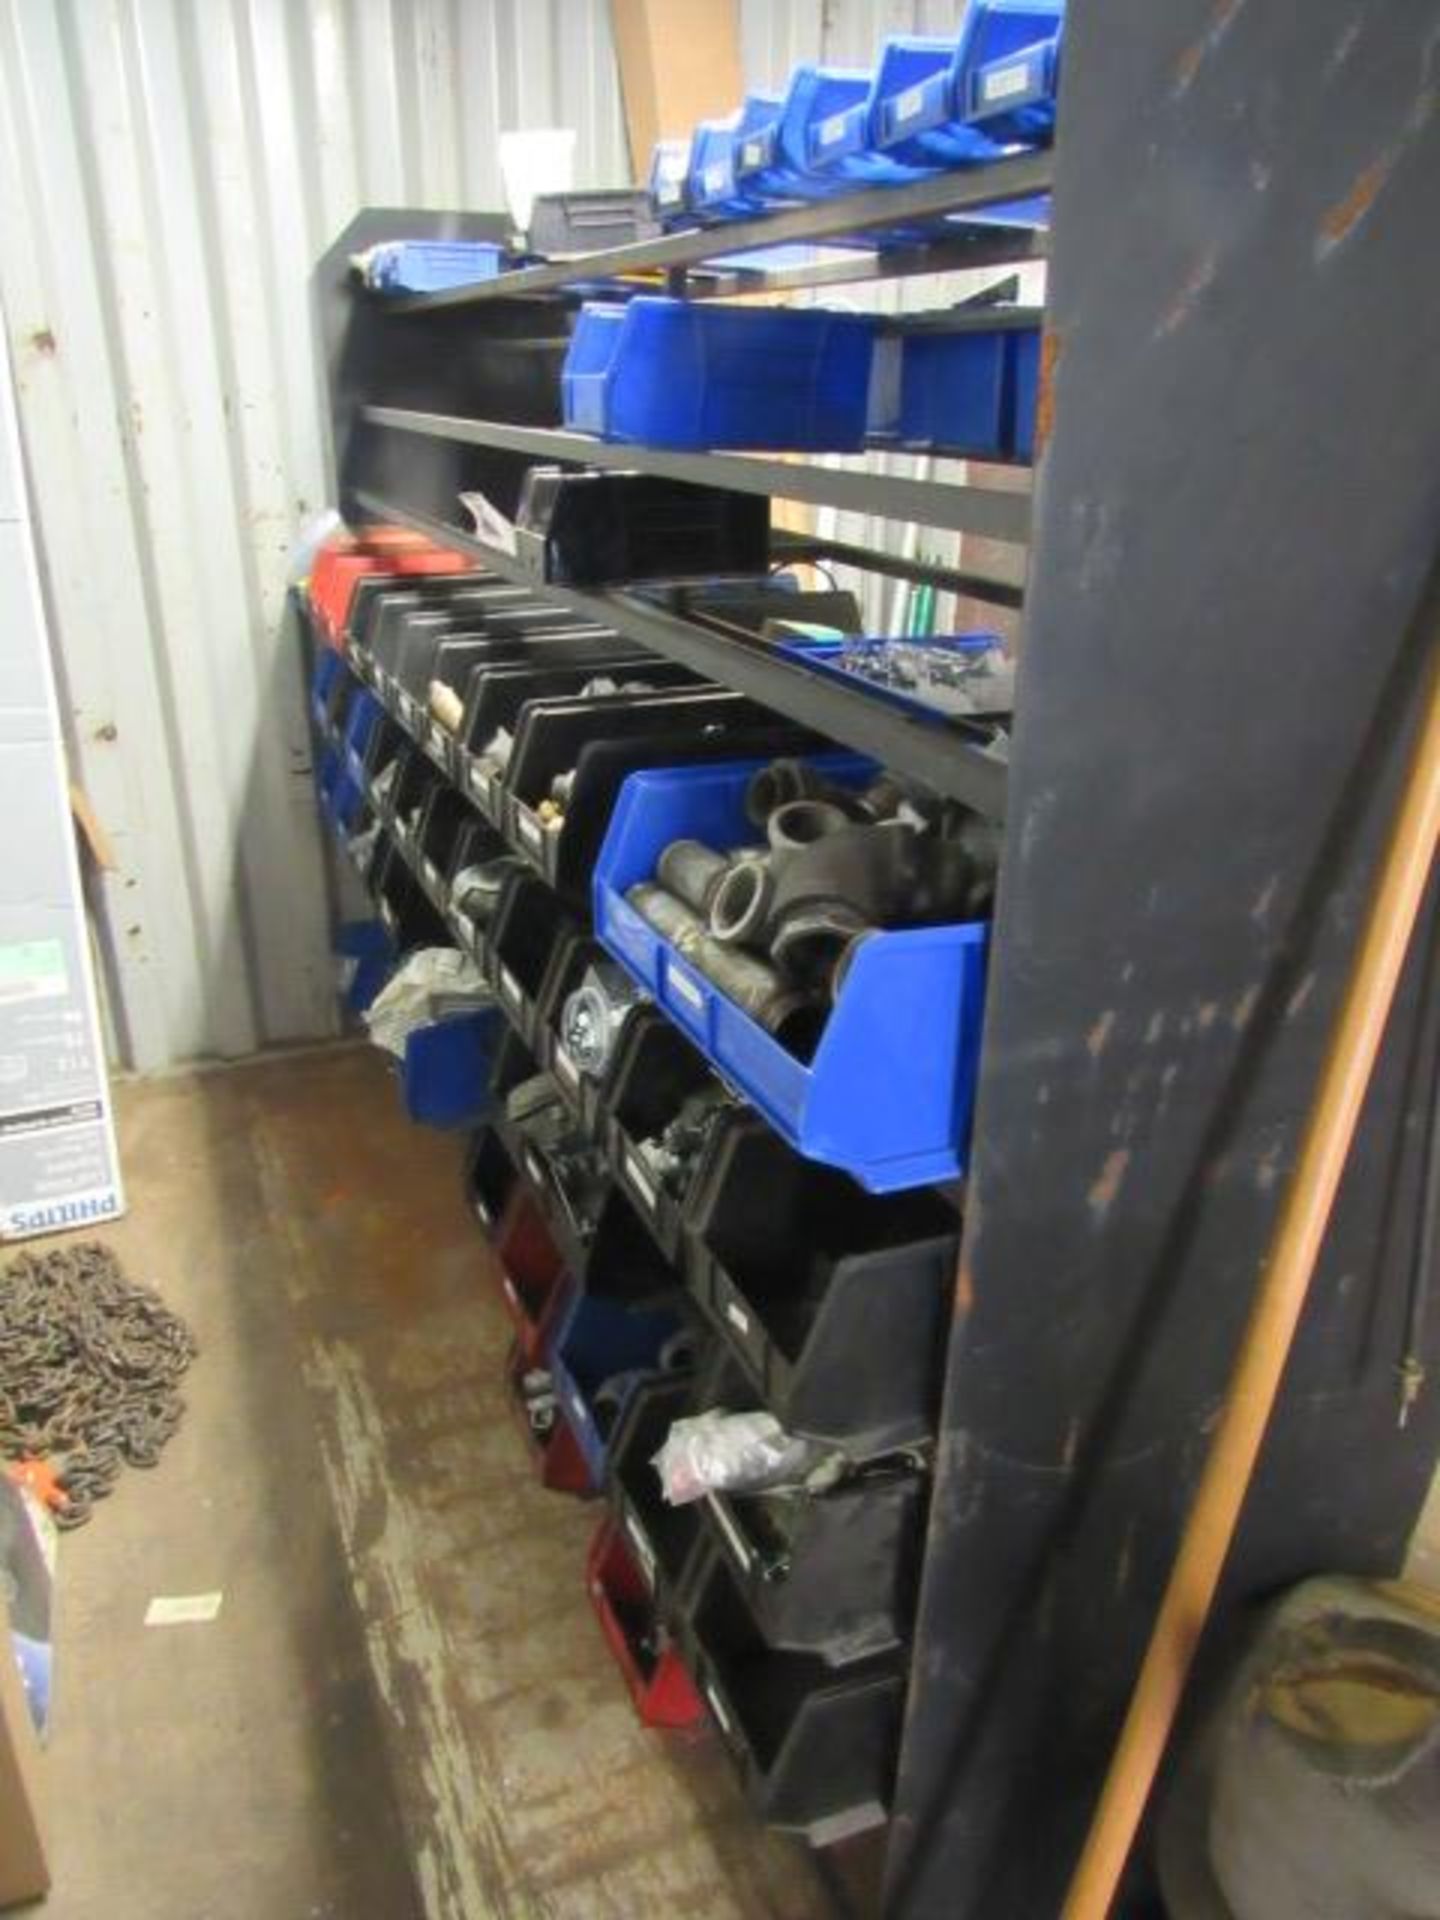 Contents of Maintenance Shed including Steel Racks, Electric, Building Supplies, Clamps, Wire